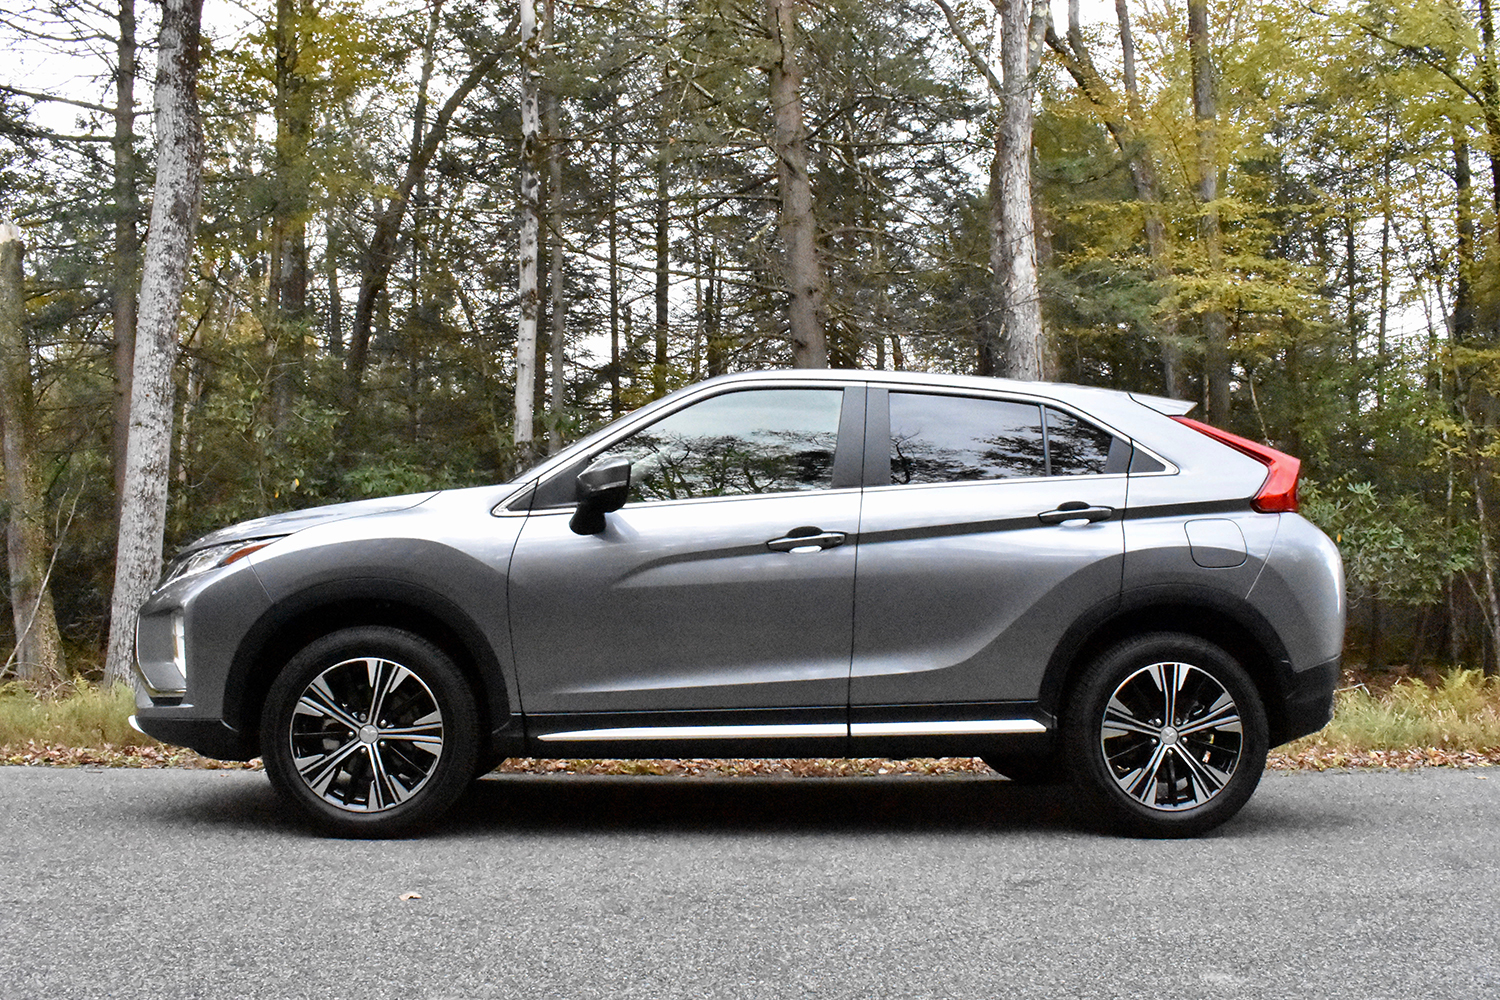 2019 Mitsubishi Eclipse Cross First Drive Review | Digital Trends